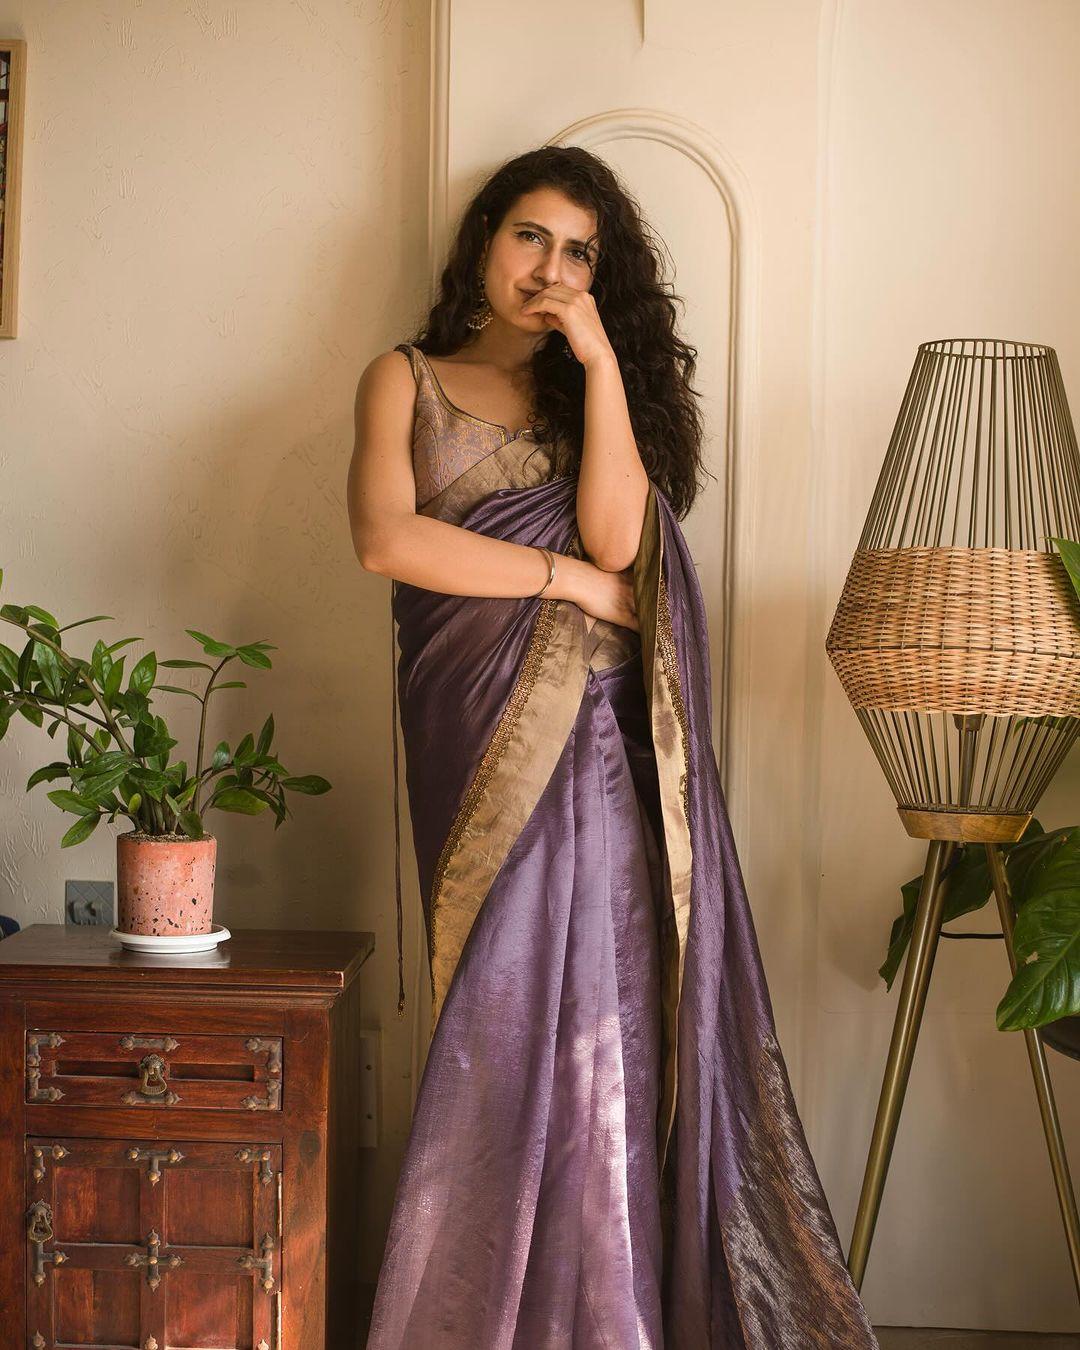 Fatima Sana Shaikh looked gorgeous in a beautifully designed saree that reflects rich cultural traditions. She donned the Radha saree along with the Ruhani blouse in Himroo. The saree and blouse are dyed with Sappan wood to create a stunning violet color. Himroo is an age-old weaving style from Maharashtra that has been revived using recycled cotton. The textile waste is carefully broken down into fibers, which are then converted into new yarn and hand-woven into this traditional textile.